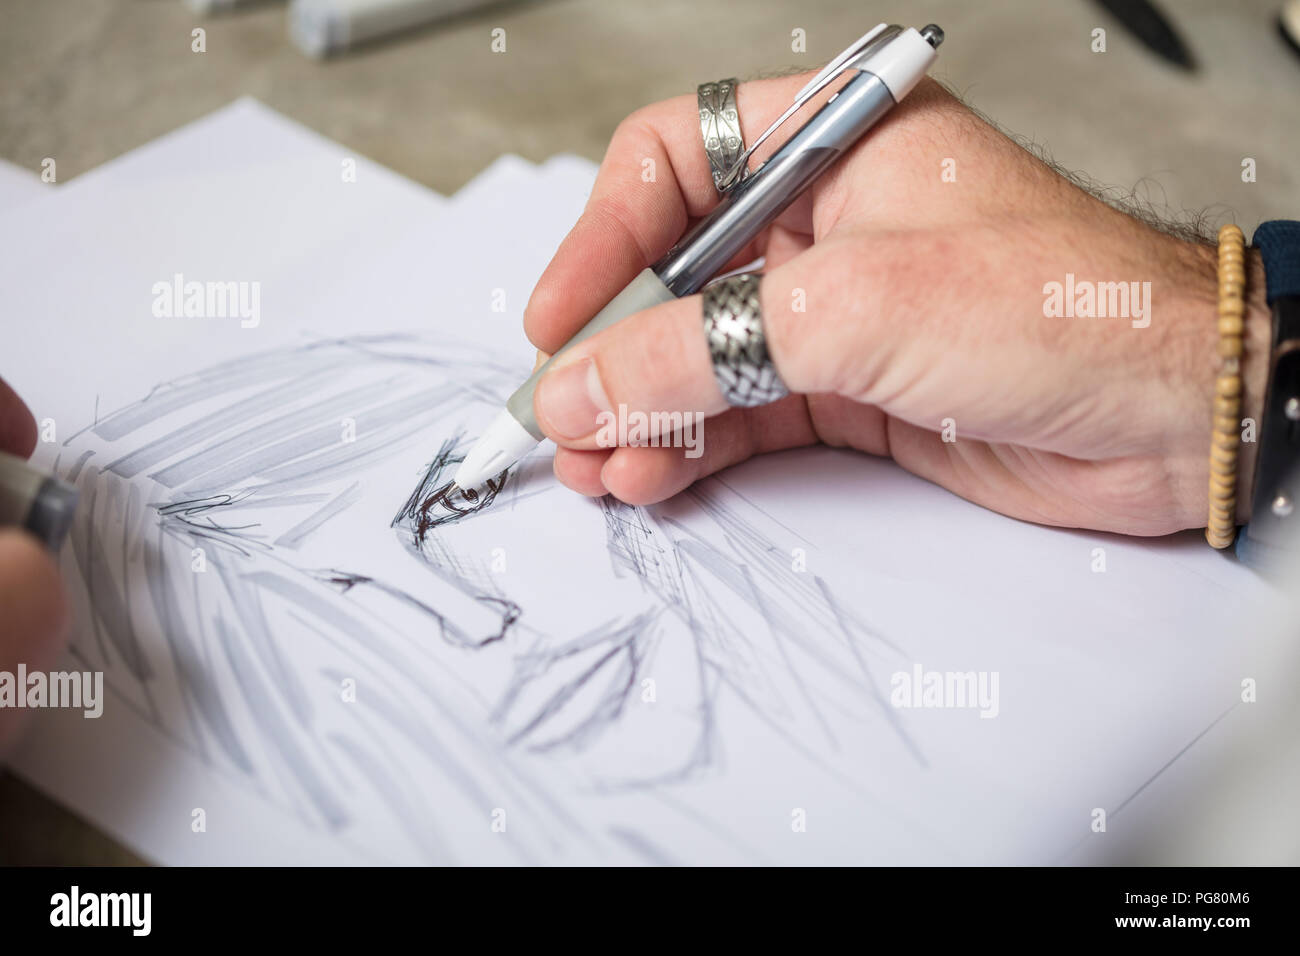 Close-up of artist drawing a sketch Stock Photo